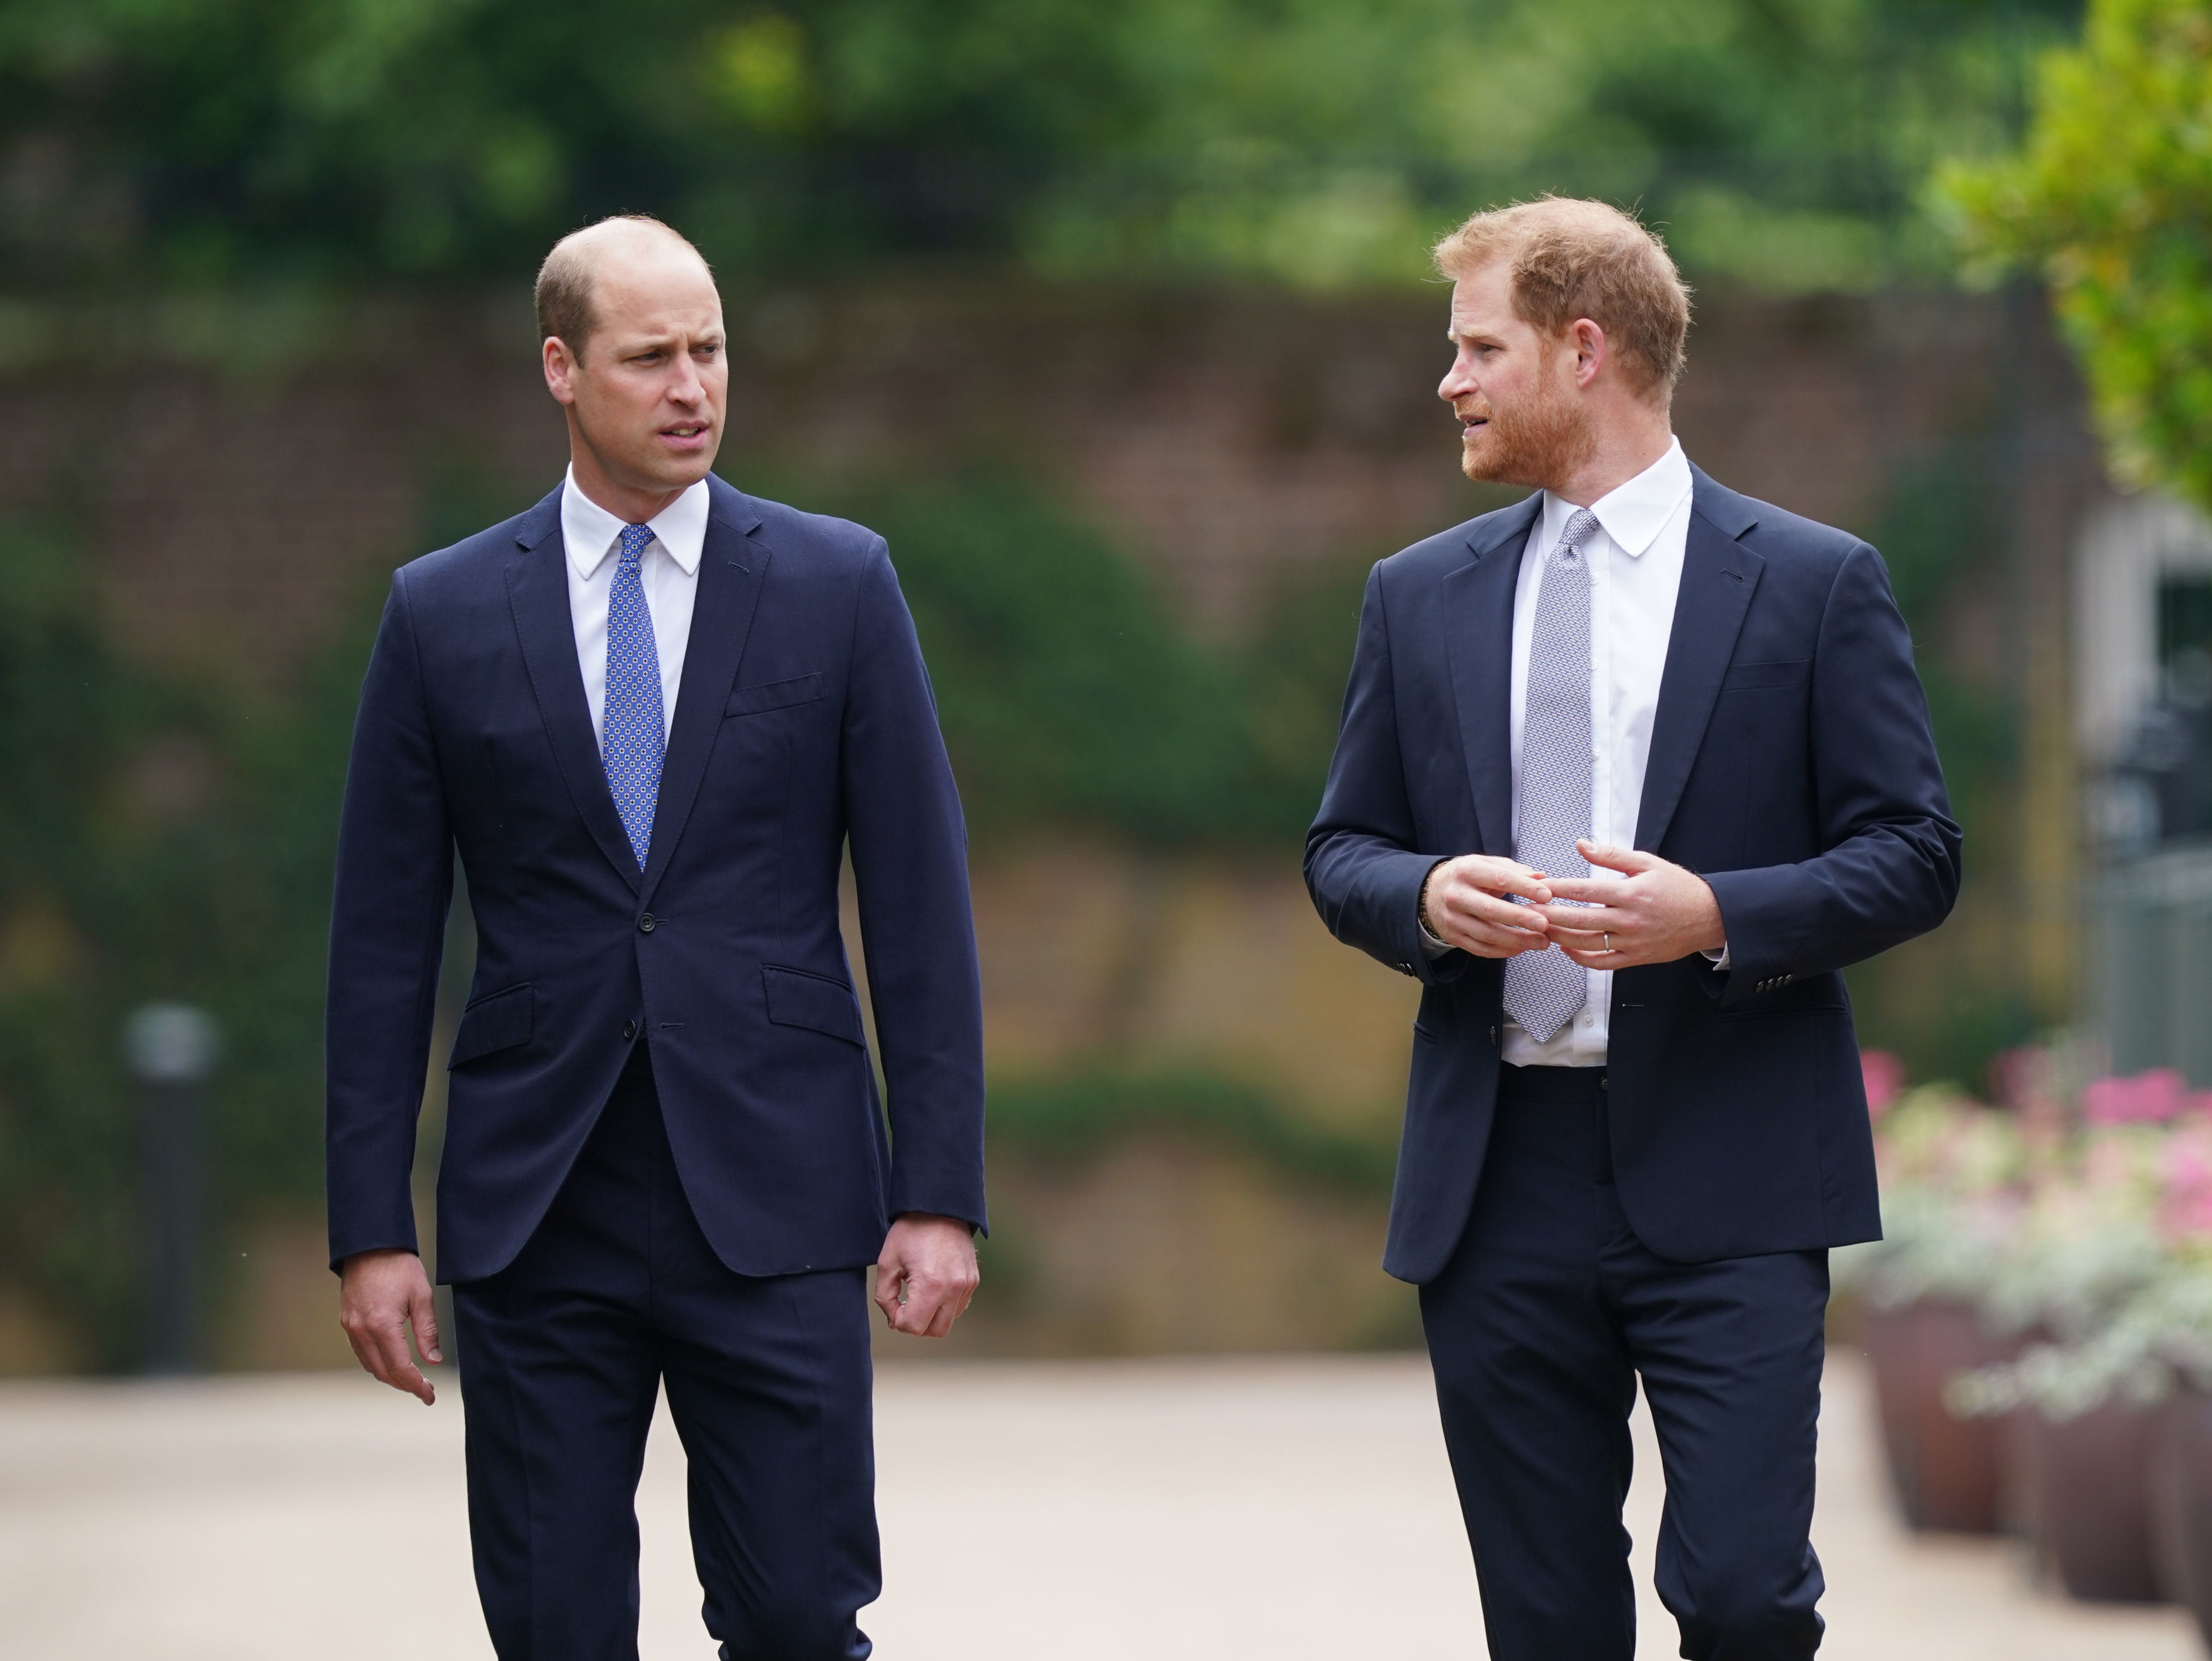 Prince Harry, Duke of Sussex and Prince William, Duke of Cambridge attend the unveiling of a statue of their mother, Princess Diana in Kensington Palace, London on July 1, 2021 | Source: Getty Images